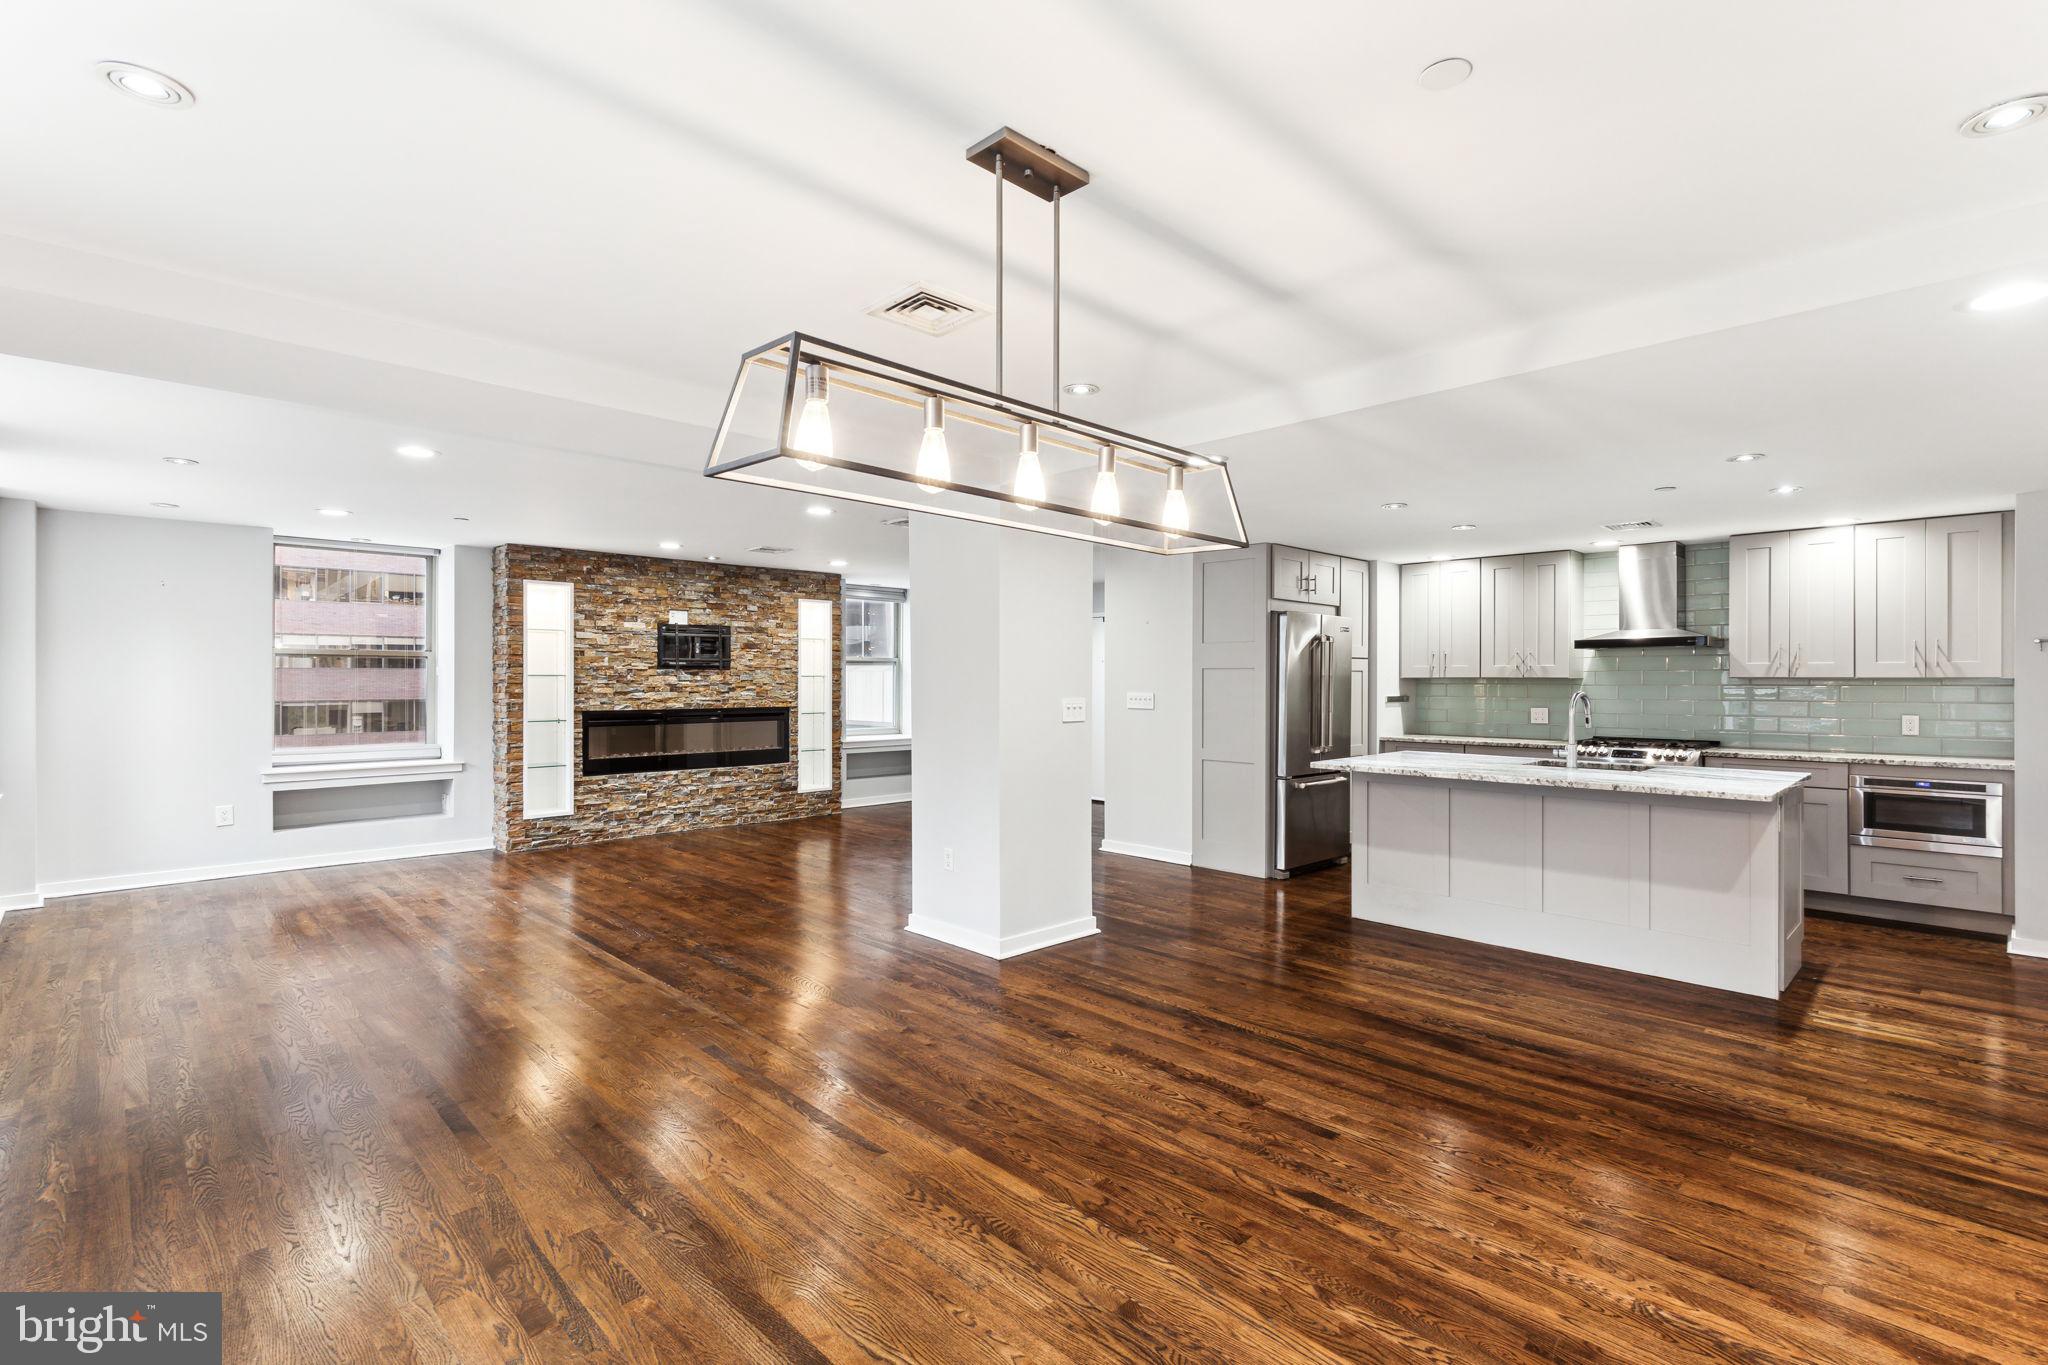 a kitchen with stainless steel appliances kitchen island wooden floors cabinets and dining table